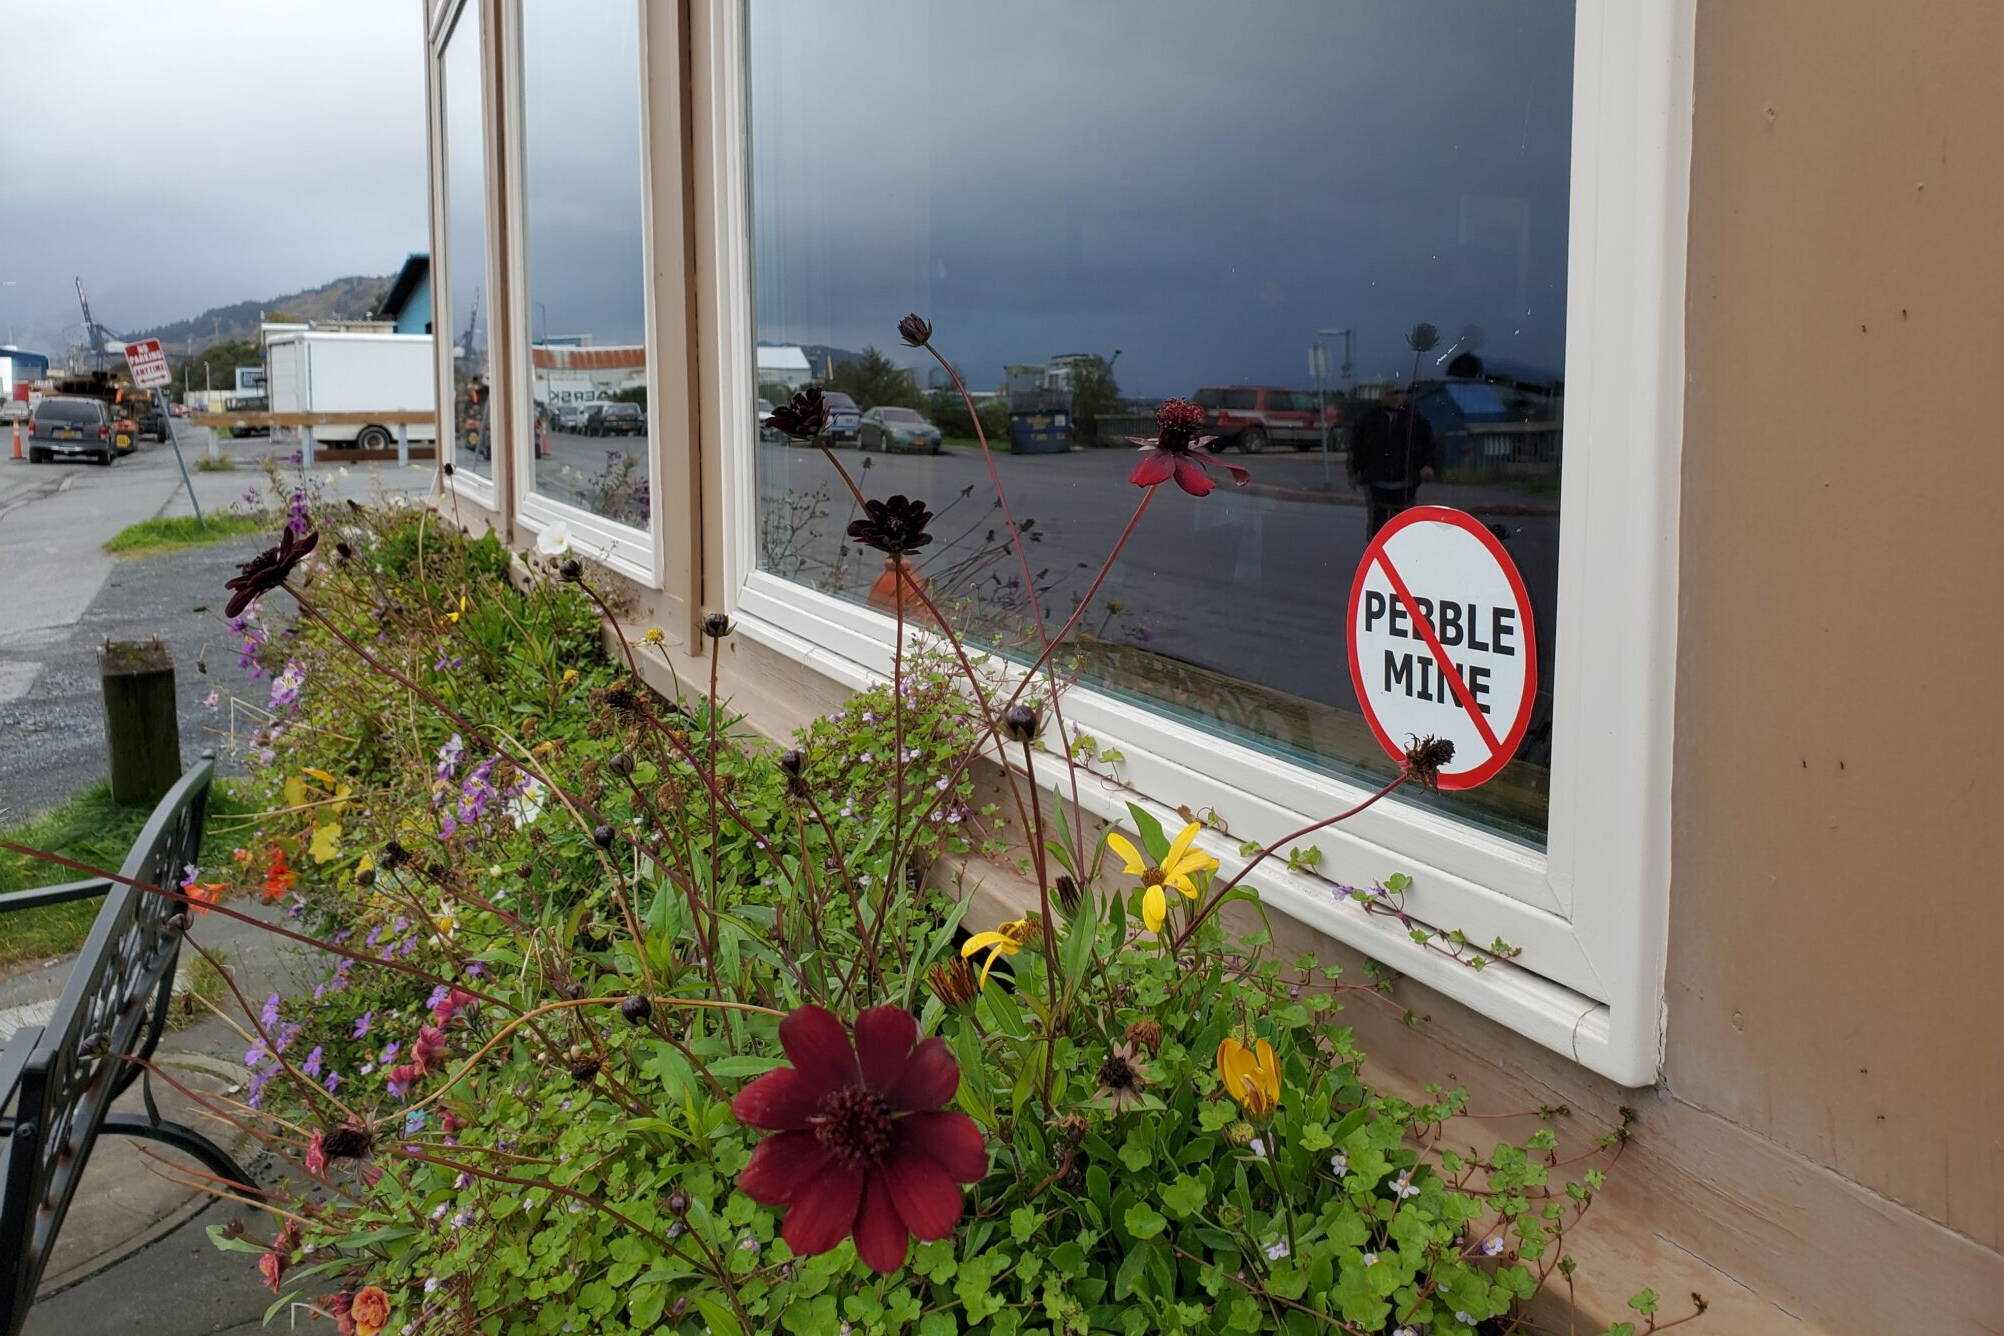 A sticker expressing opposition to the Pebble Mine is seen on a coffee shop window in Kodiak on Oct. 3, 2022. Opposition to the mine has been widespread in Alaska’s fishing communities for several years. The fight is now being waged in briefs filed with the U.S. Supreme Court, as the Pebble Limited Partnership continues to push for mine development. (Photo by Yereth Rosen/Alaska Beacon)